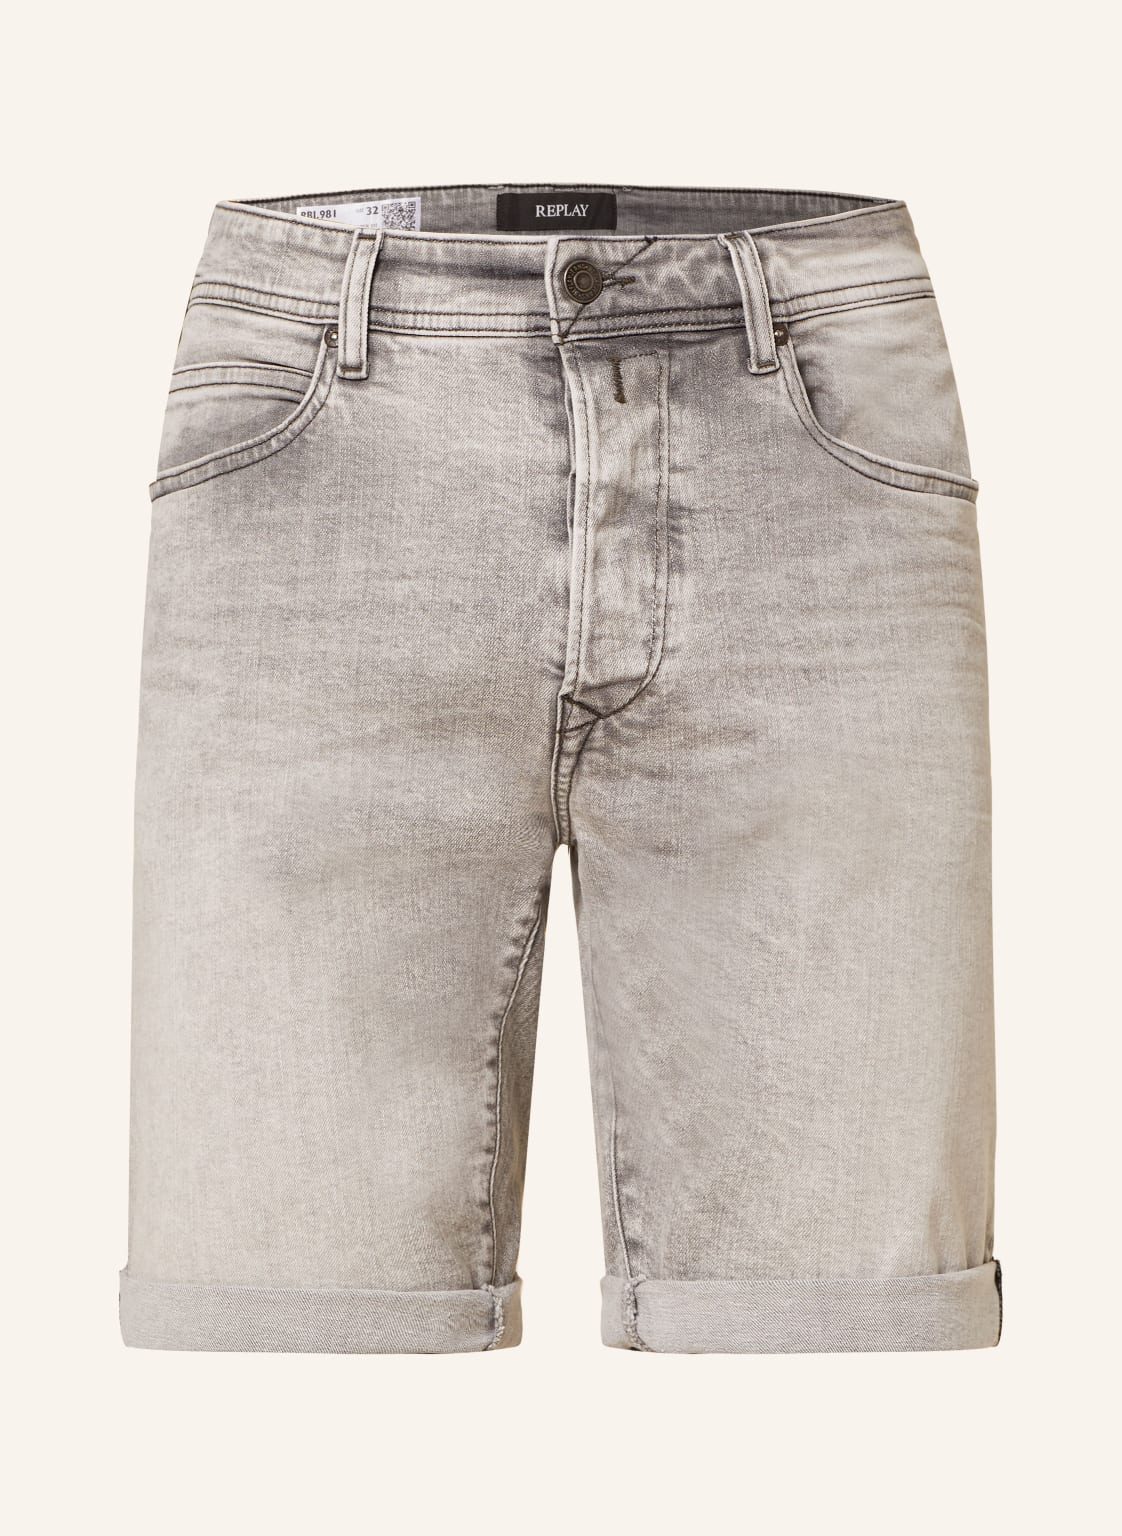 Replay Jeansshorts 573 Tapered Fit grau von Replay